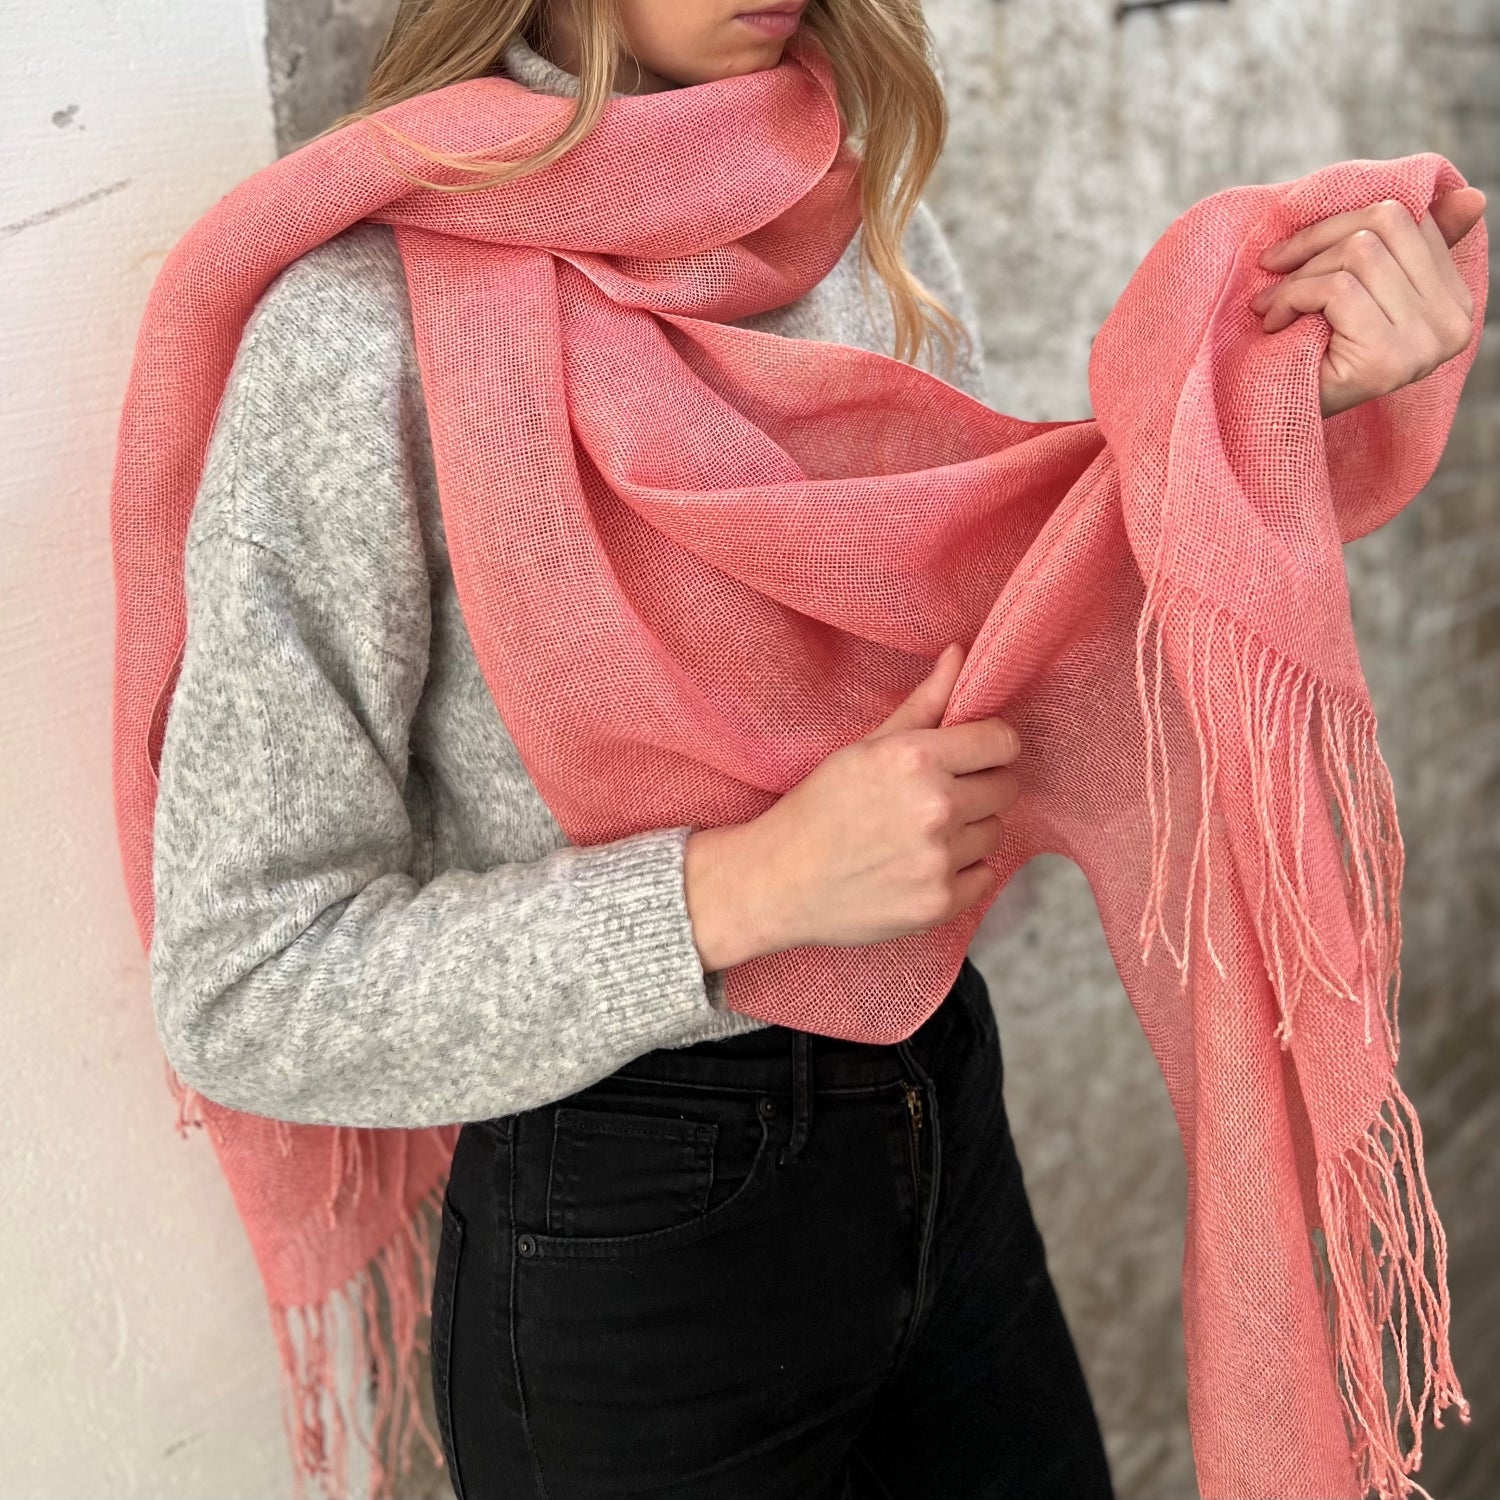 Handwoven Linen scarf Pink Coral 70x220 cm